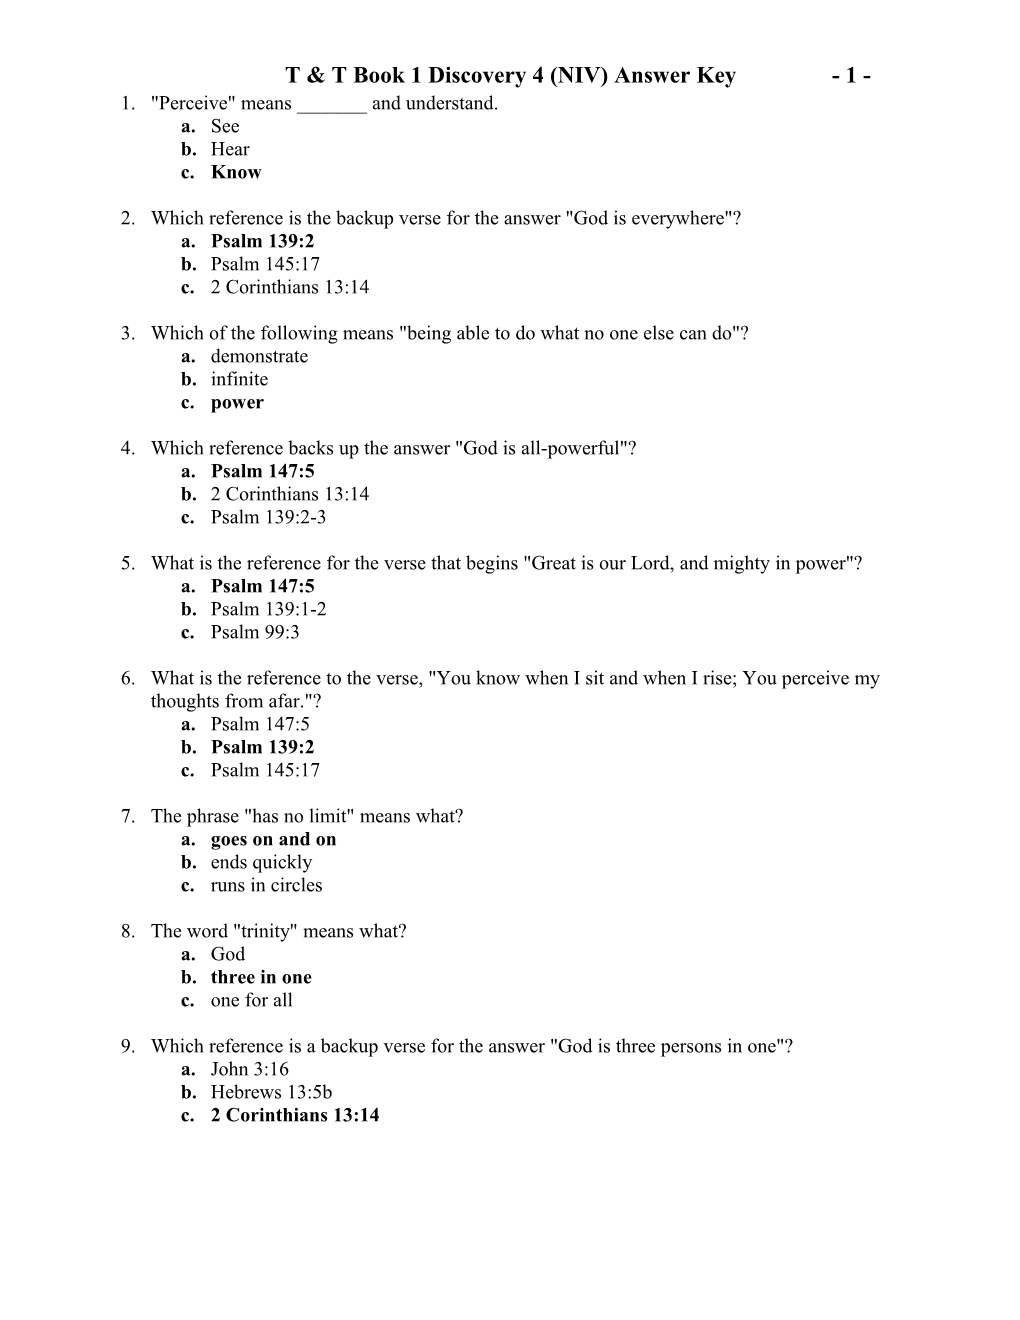 T & T Book 1 Discovery 4 (NIV) Answer Key - 3